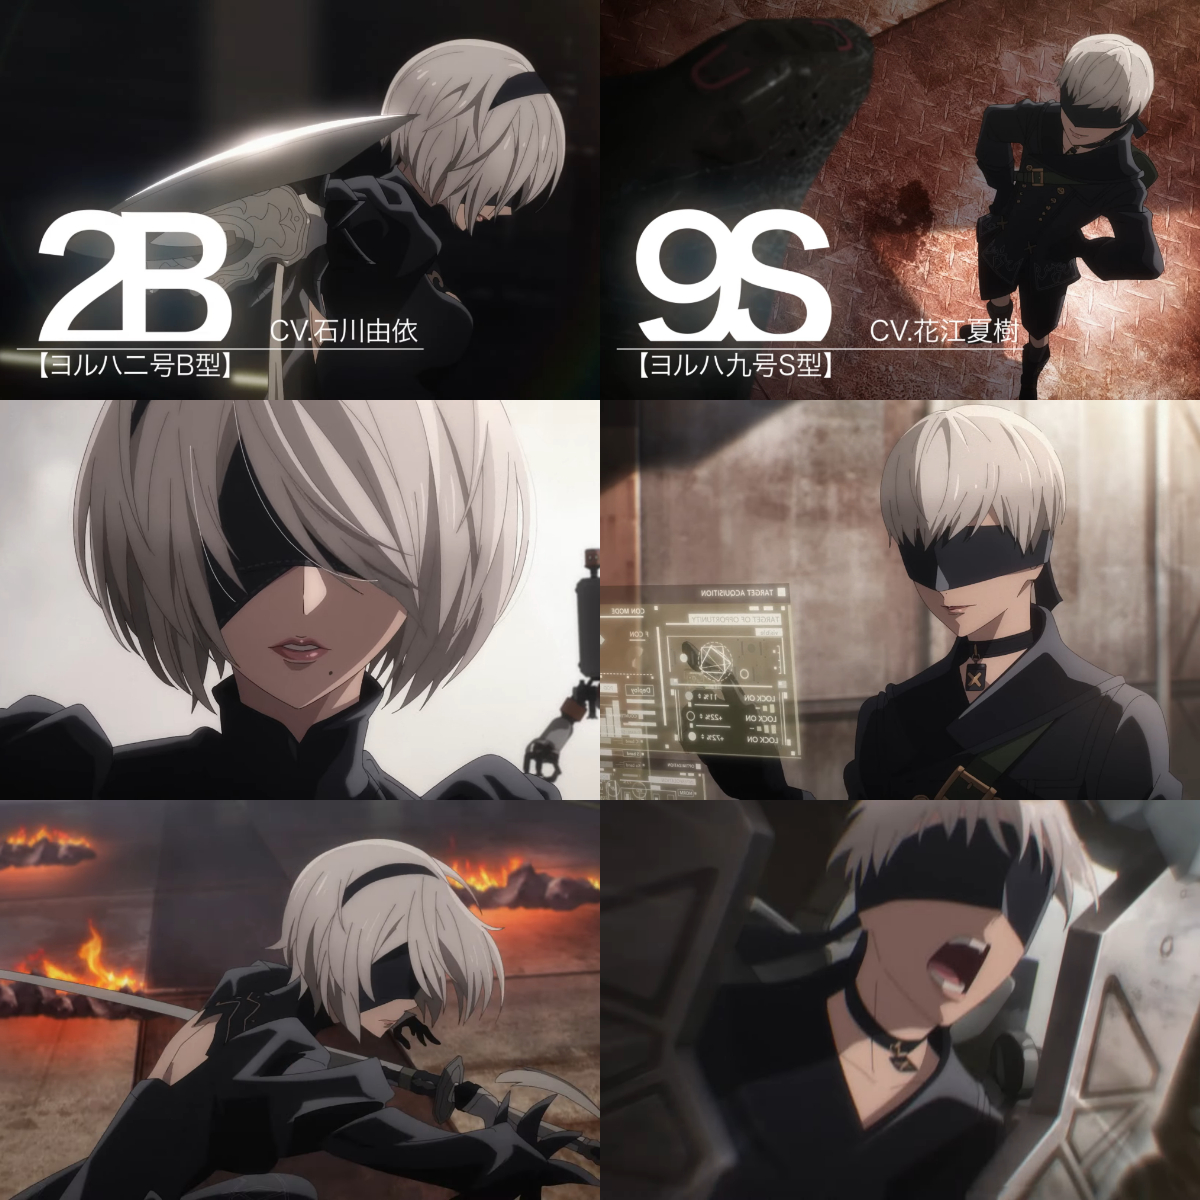 Broadcast Of NieR Automata Ver11a Anime Postponed After Third Episode